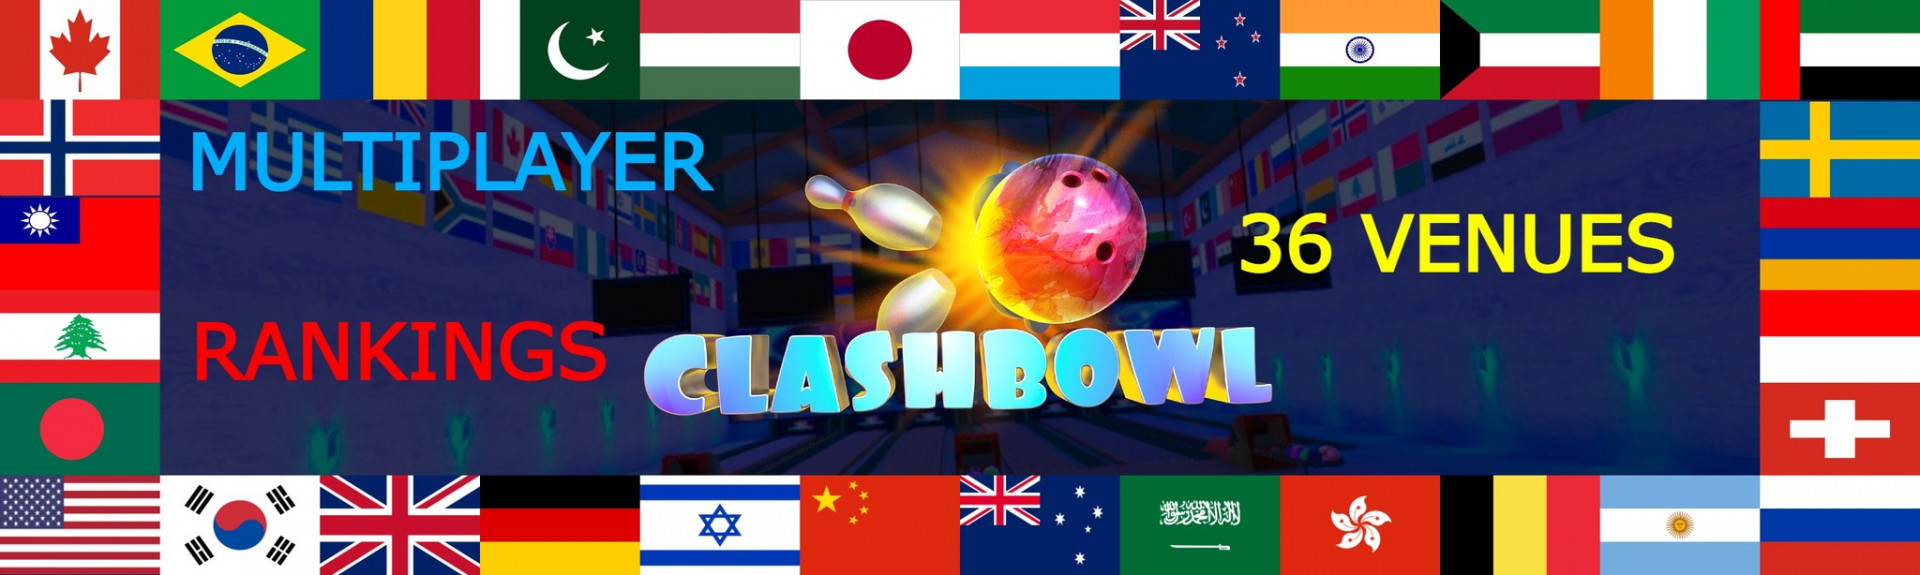 CLASHBOWL: The Ultimate VR Bowling Game for Oculus Rift!